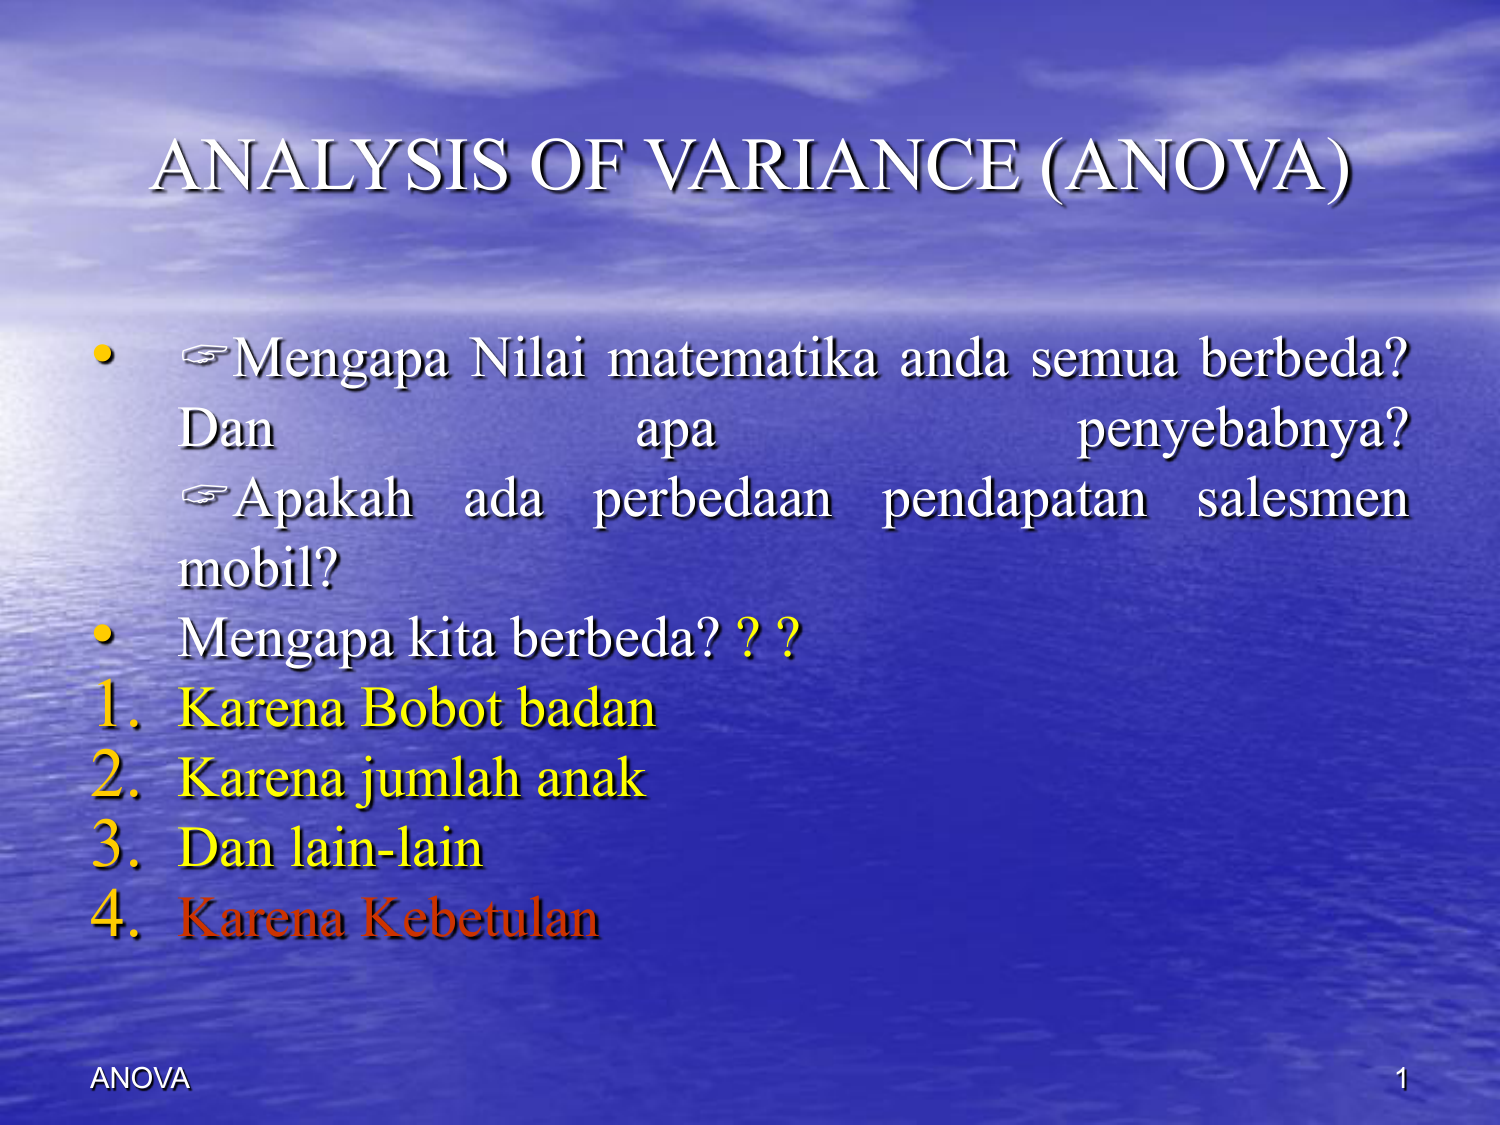 Research paper on variance analysis